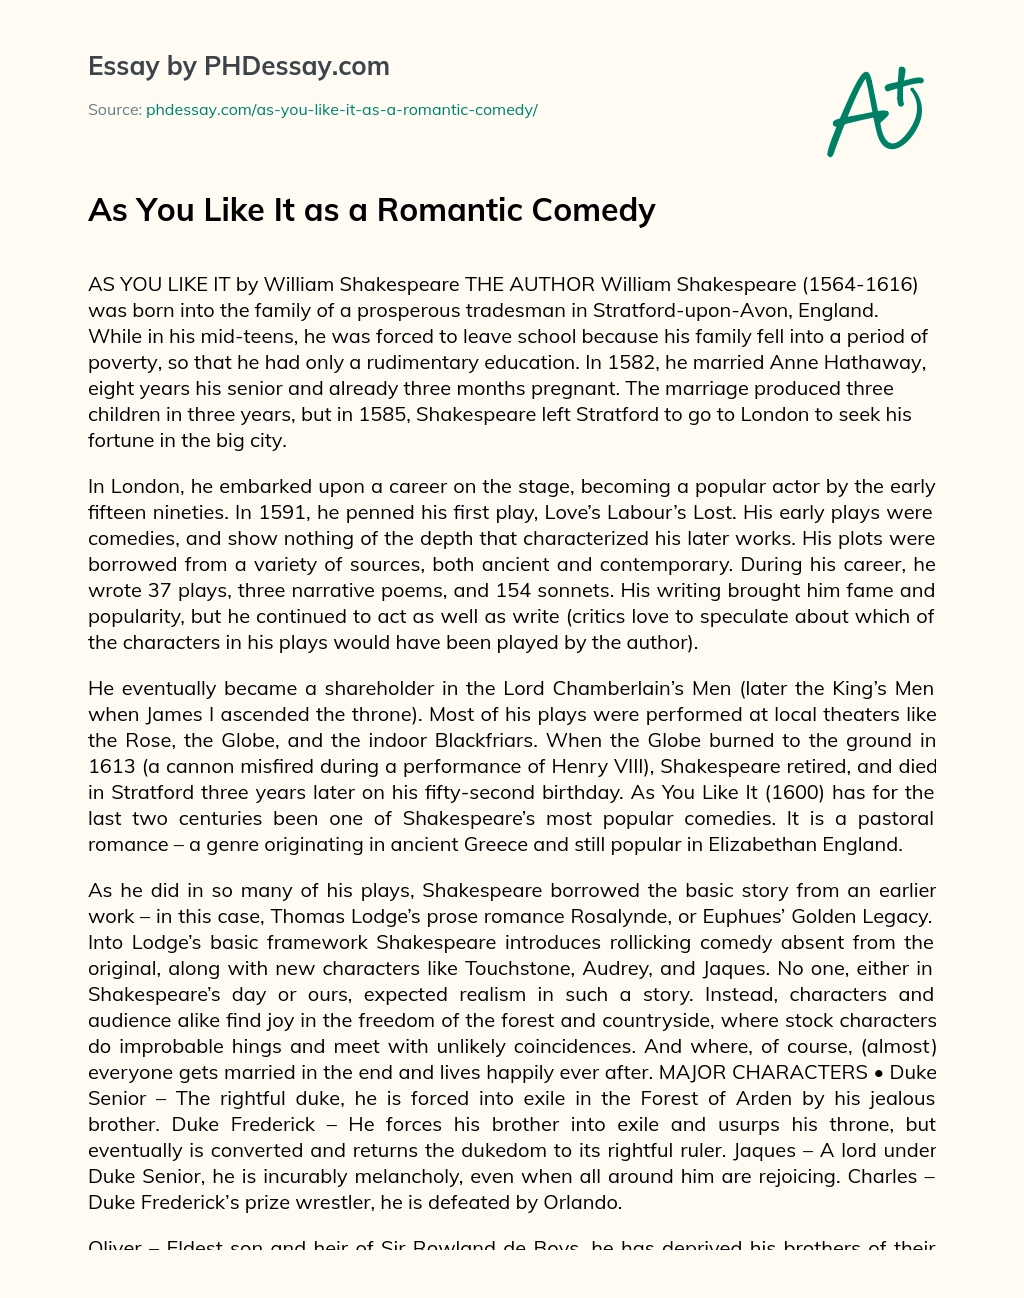 As You Like It as a Romantic Comedy essay